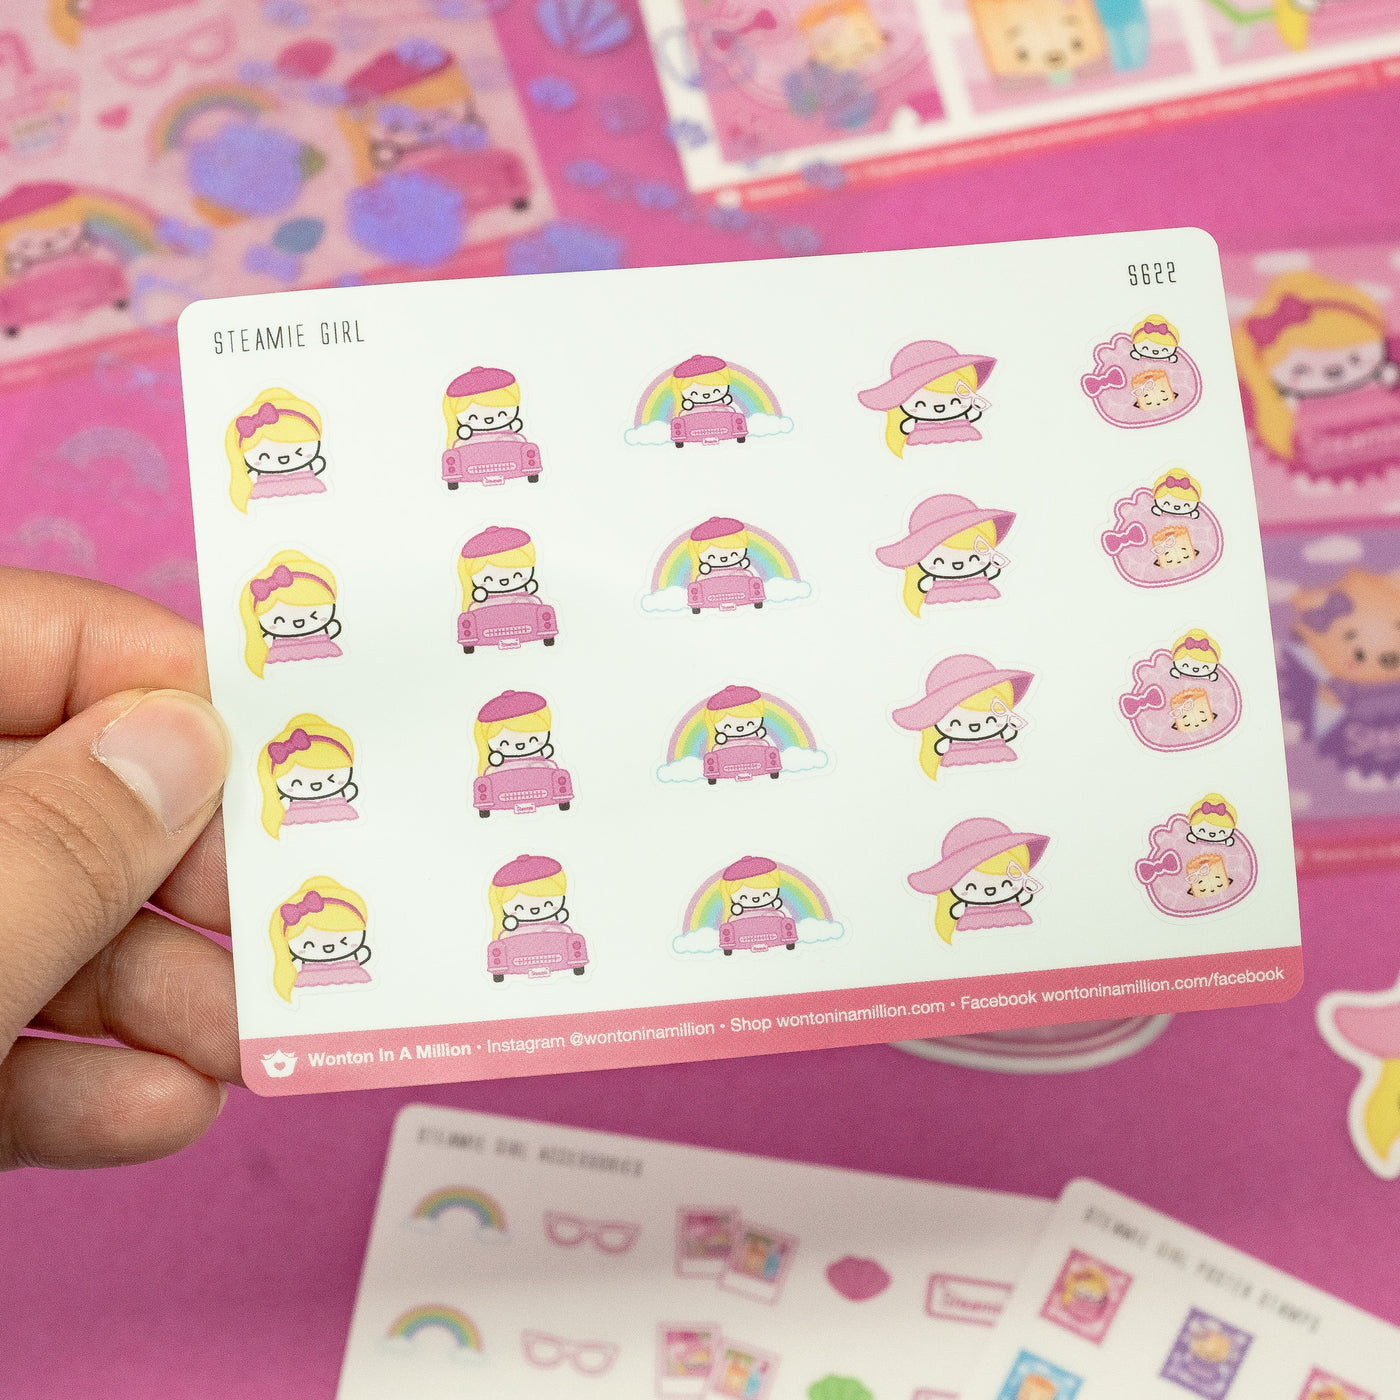 S622 | Steamie Girl Stickers